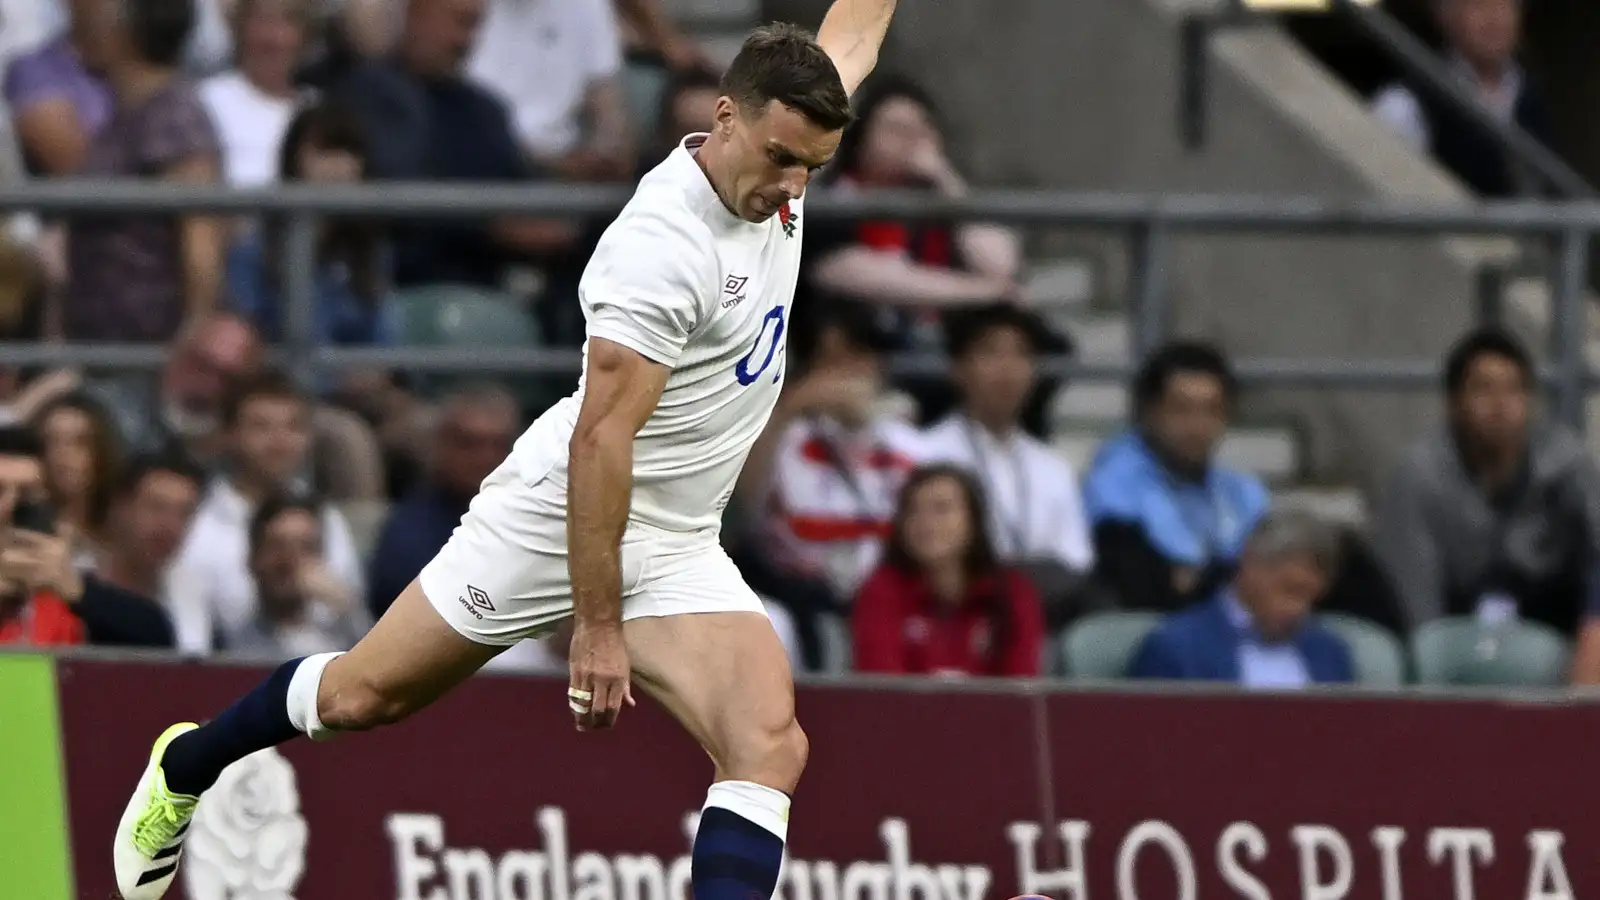 Owen Farrell left out of England team as George Ford at 10 against Ireland  : PlanetRugby